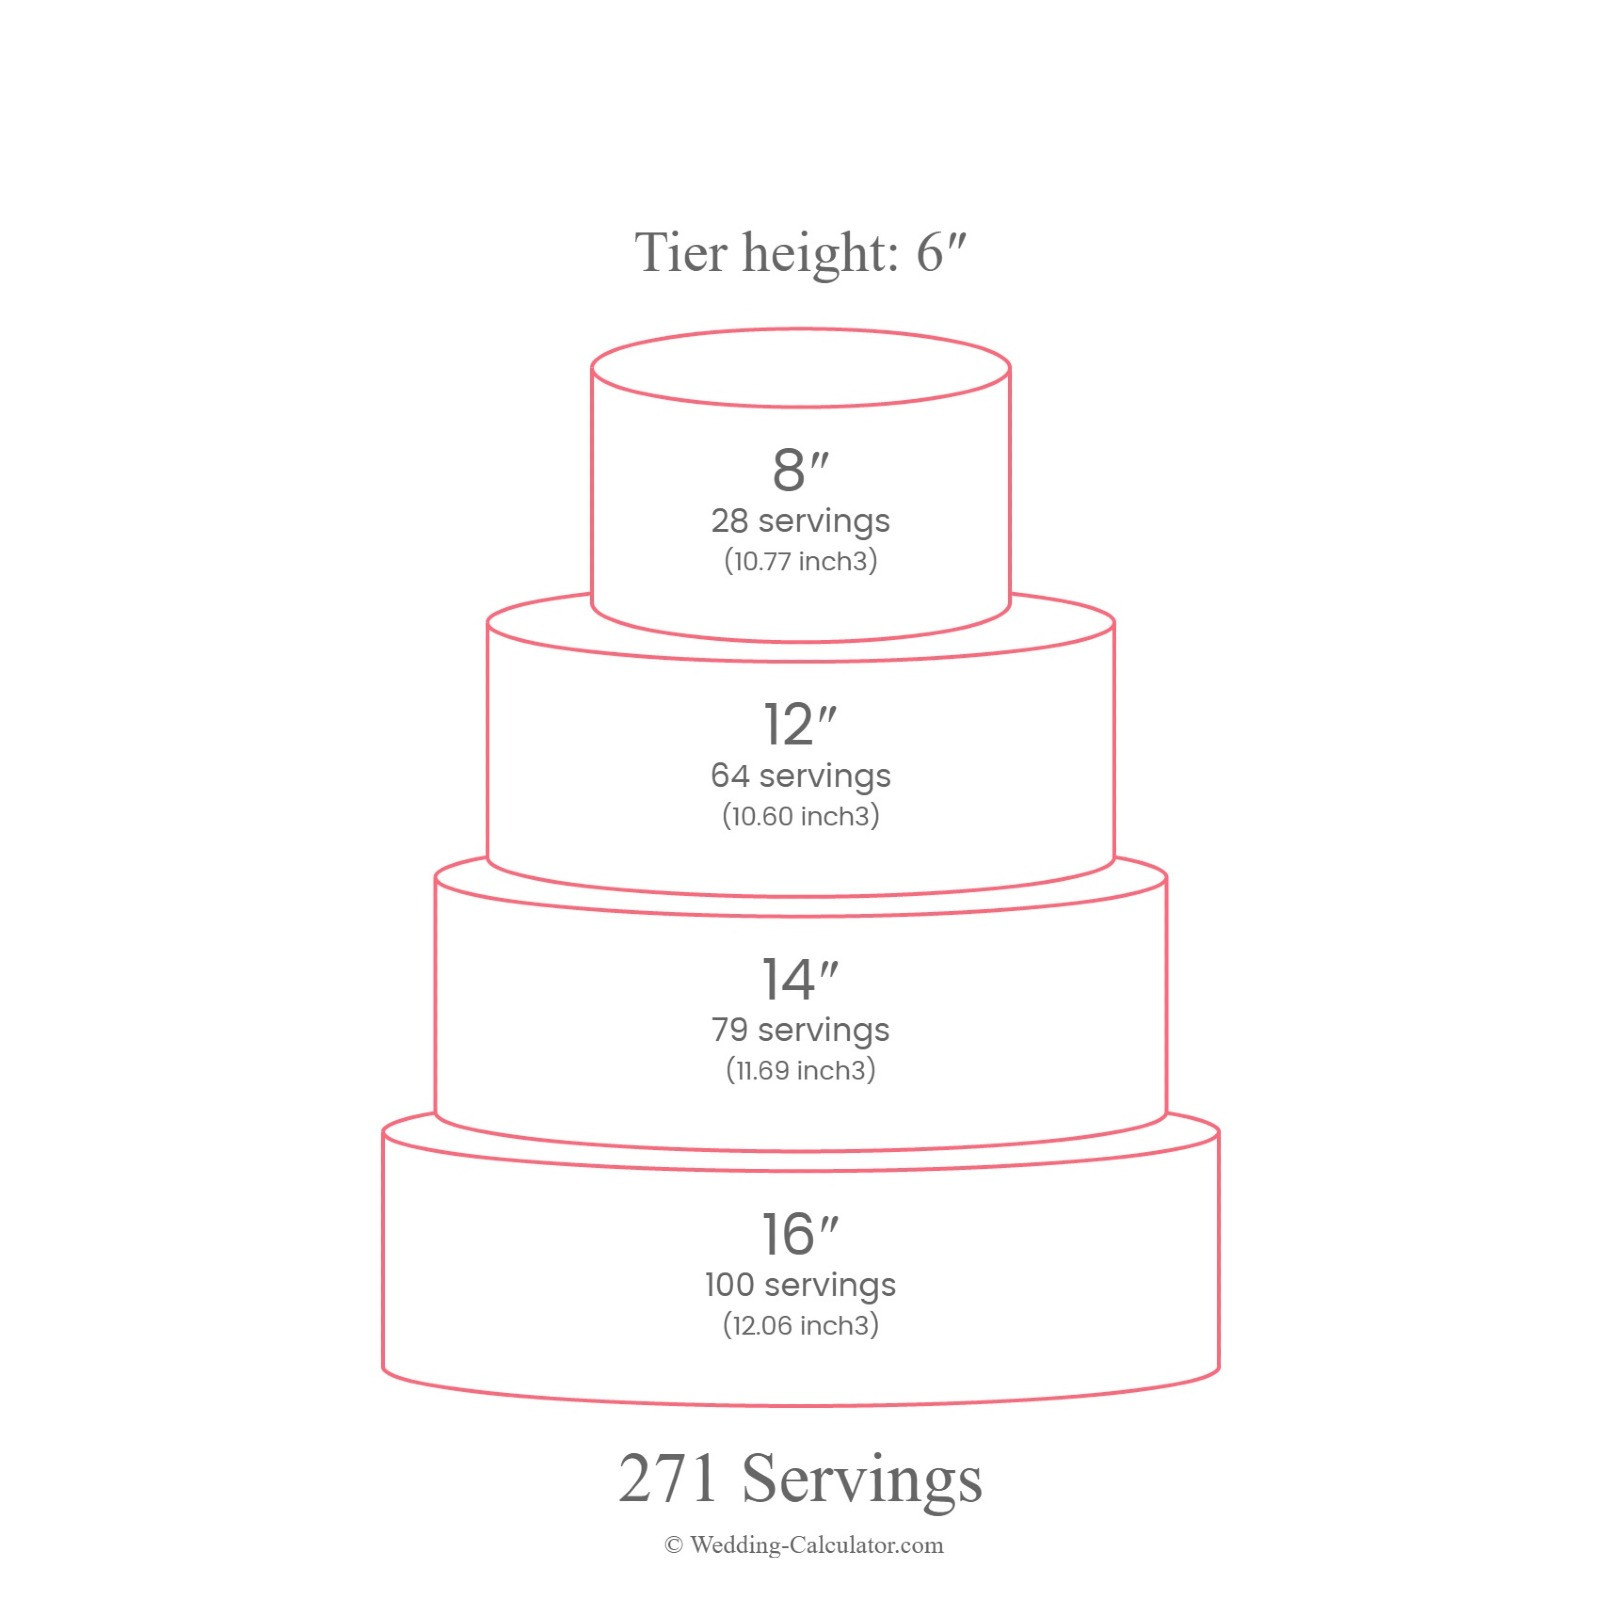 An alternative wedding cake size for 250 guests